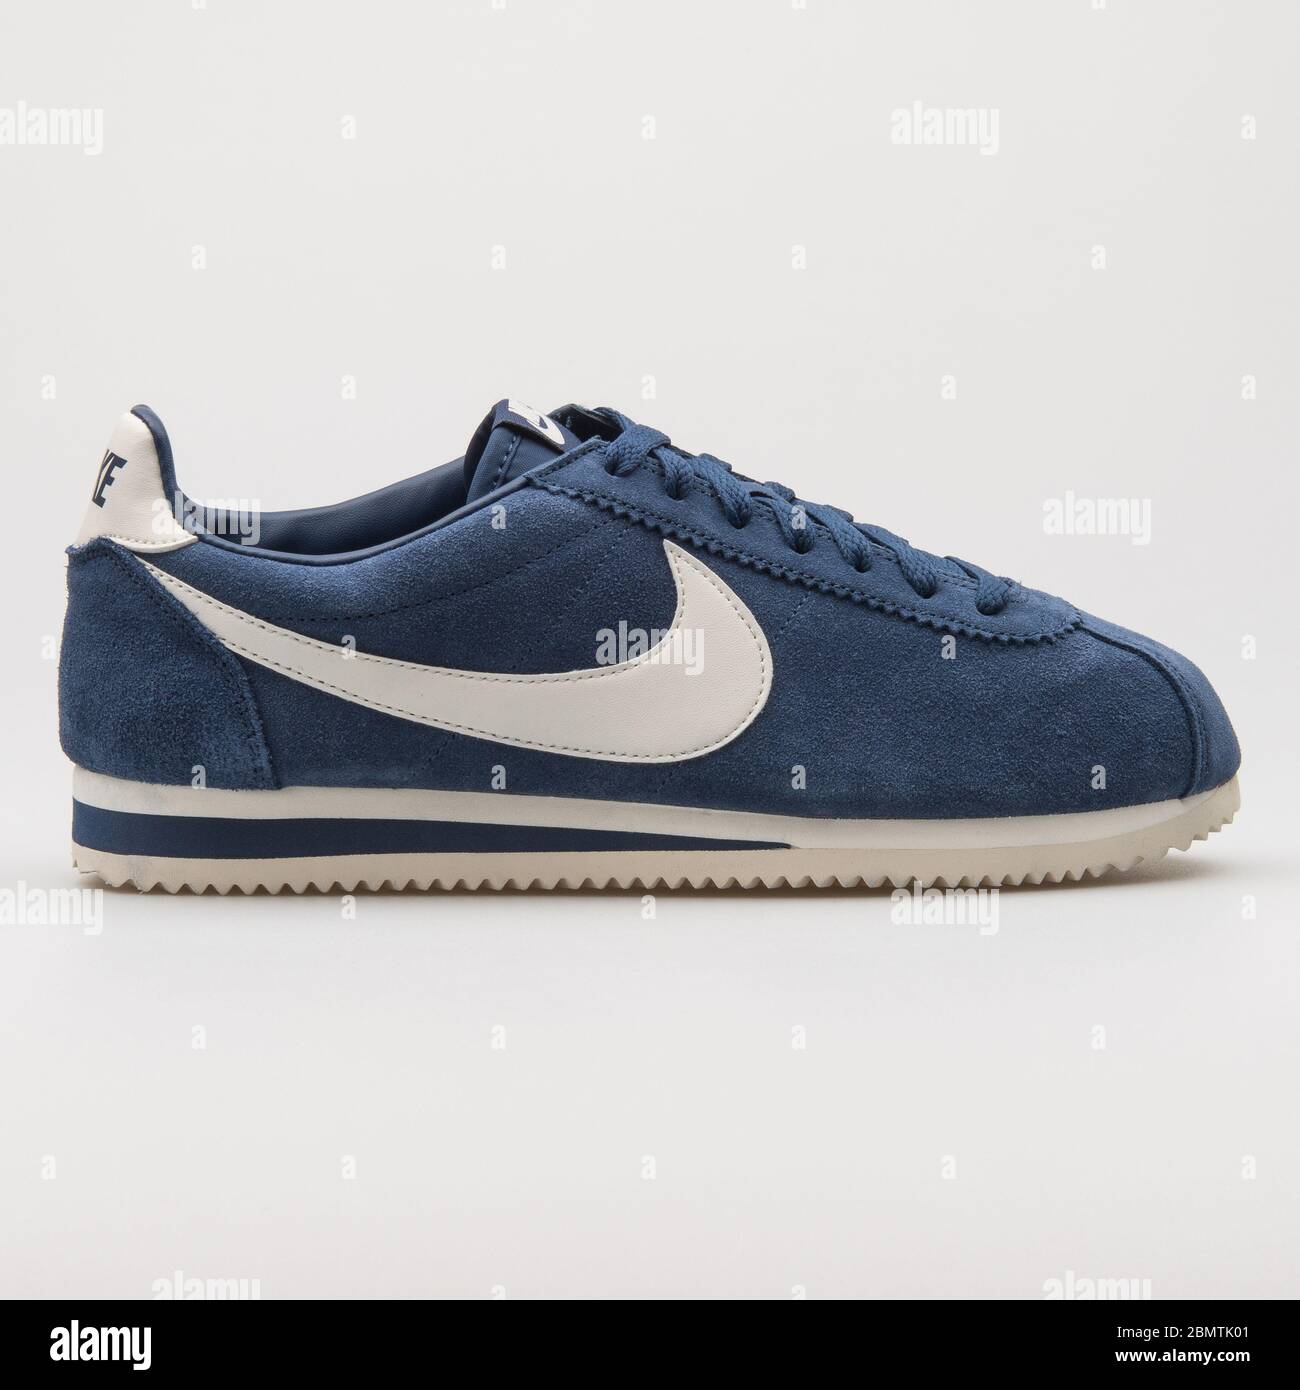 VIENNA, AUSTRIA - FEBRUARY 19, 2018: Nike Classic Cortez Suede navy blue  and white sneaker on white background Stock Photo - Alamy